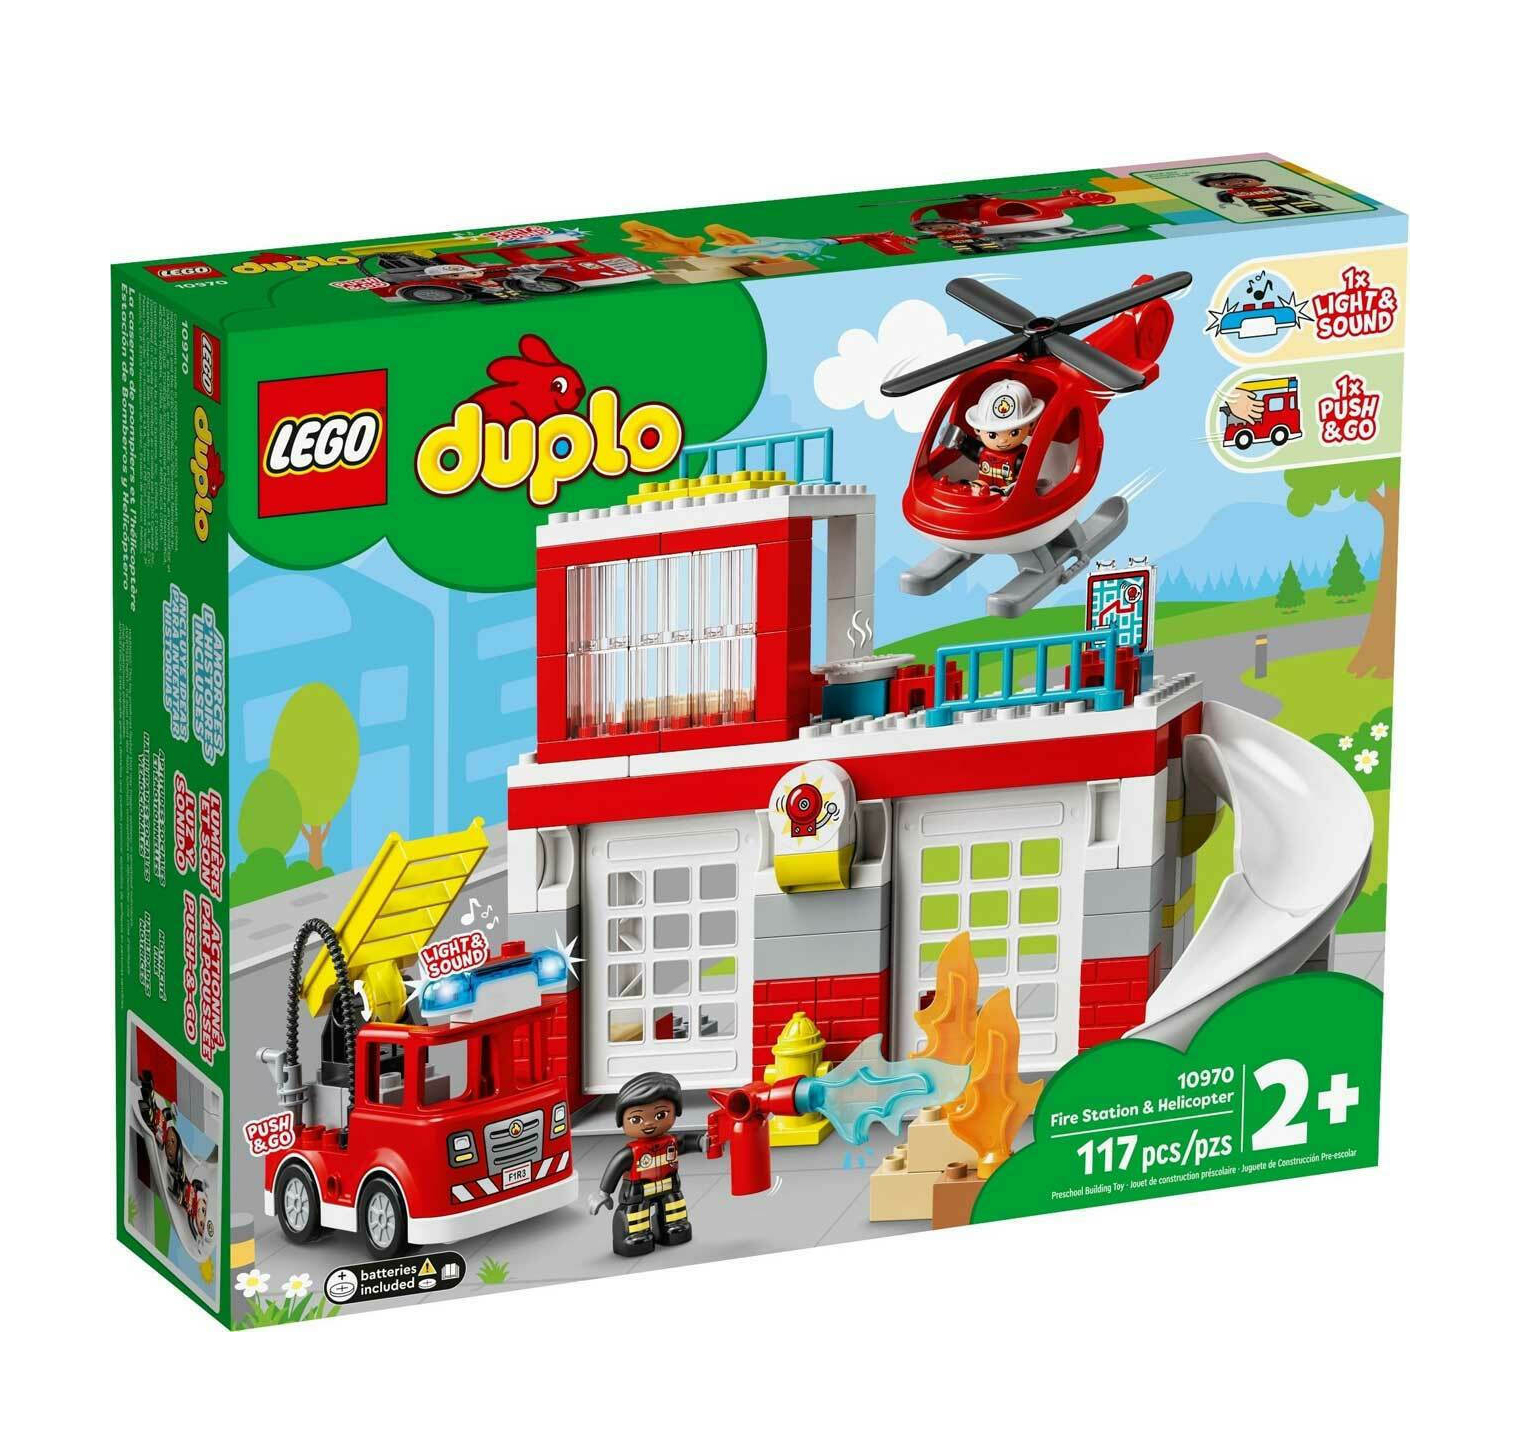 Lego Duplo Fire Station Helicopter 10970